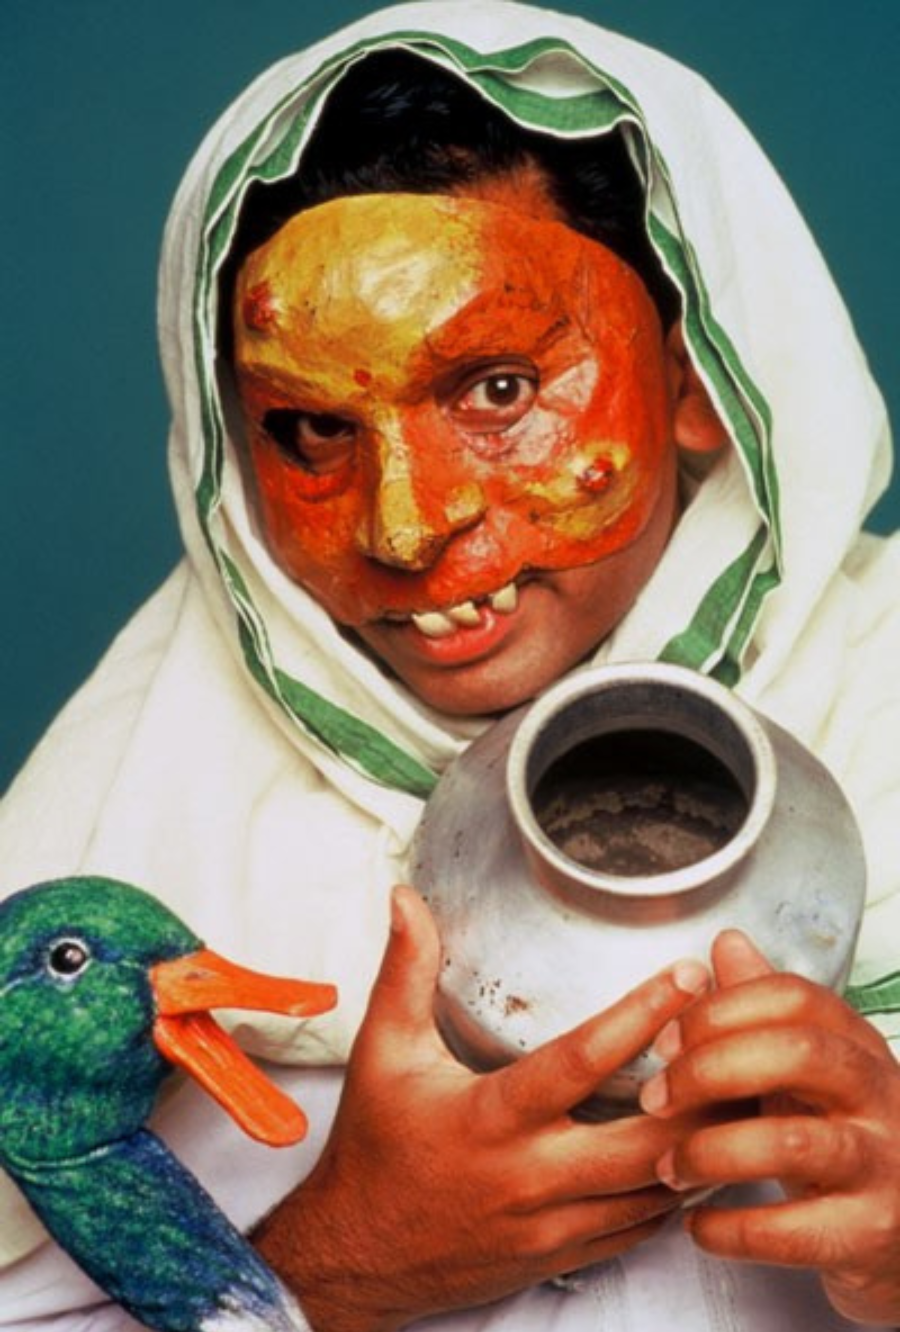 Jacob Rajan wears a papier mache half mask with a white shawl draped around him and his head, playing the character Kalyani. He holds a vase and points it at the camera with a shy smile. There is a duck puppet beside Kalyani.